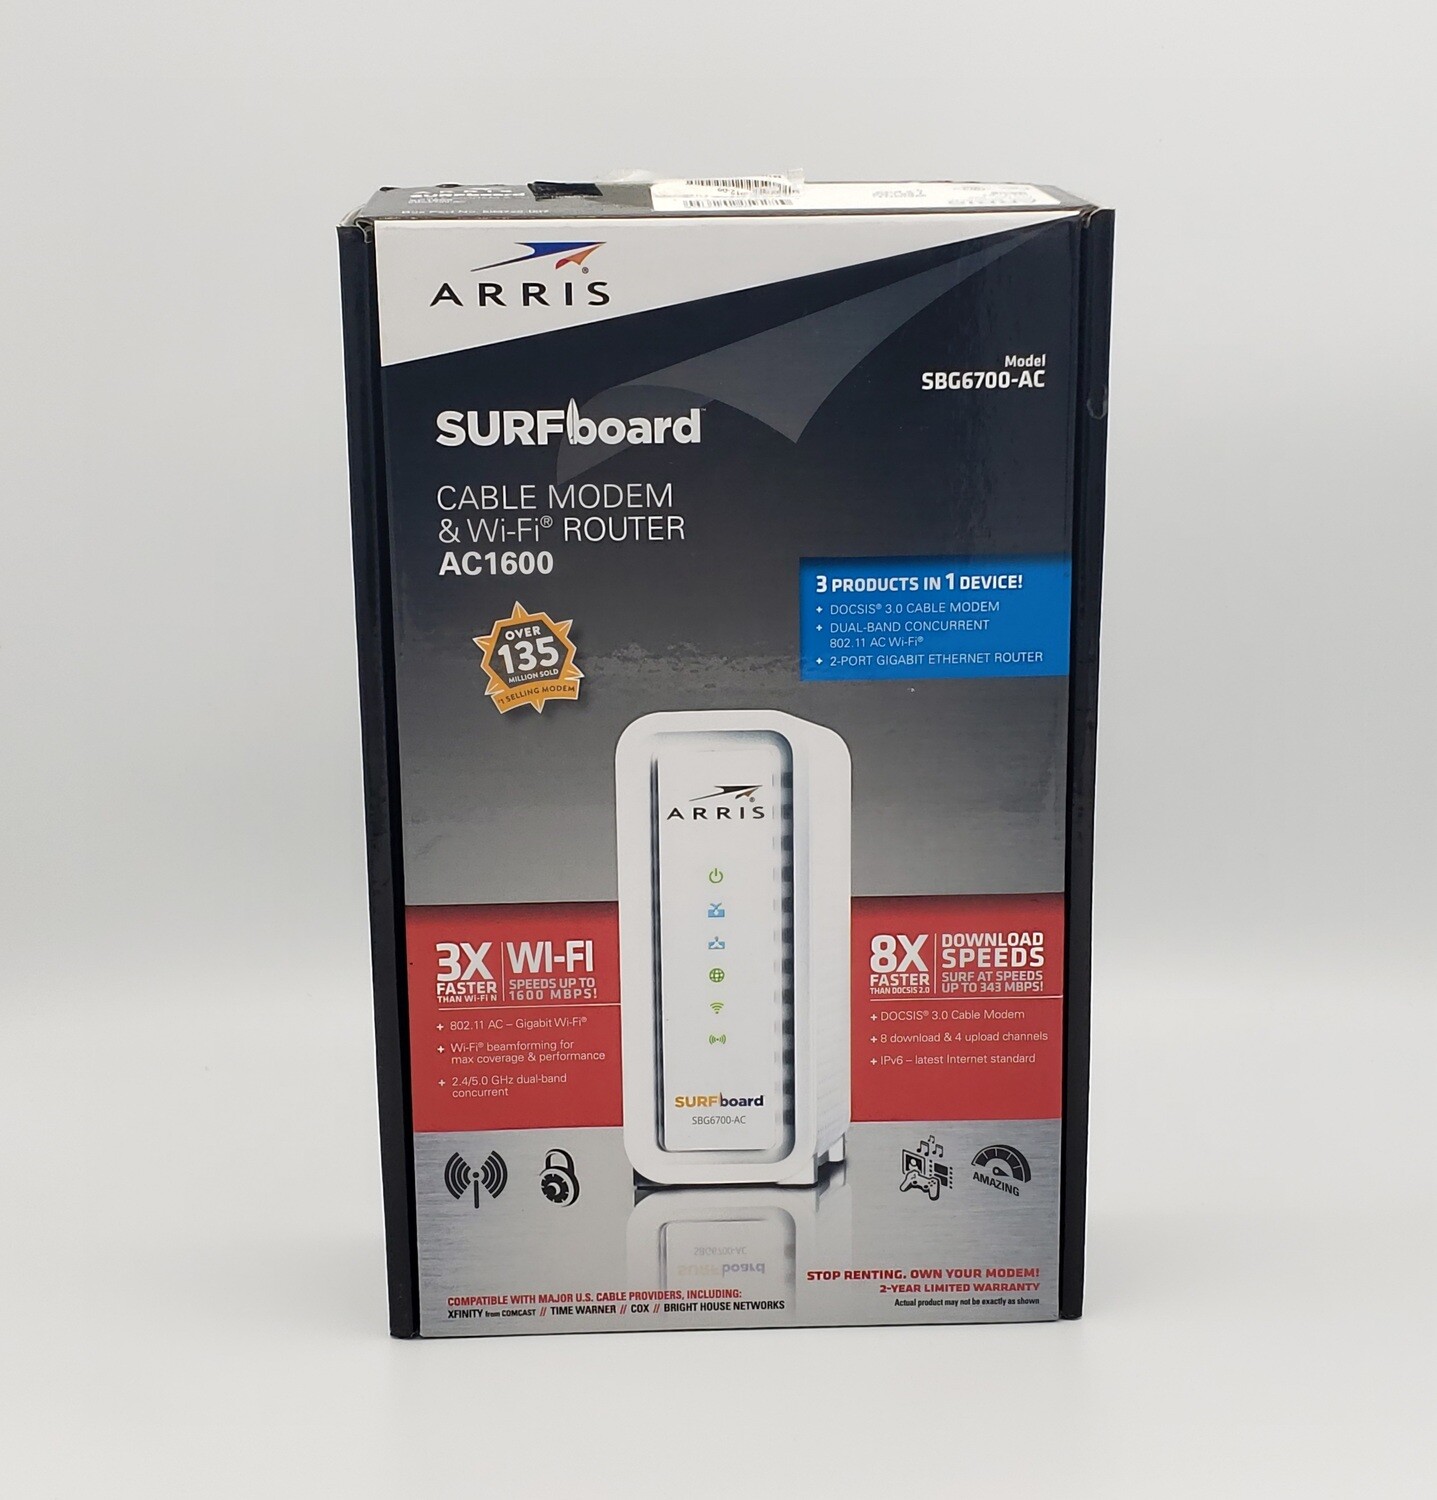 ARRIS SURFboard SBG6700-AC Cable Modem & Wi-Fi Router AC1600 - Used